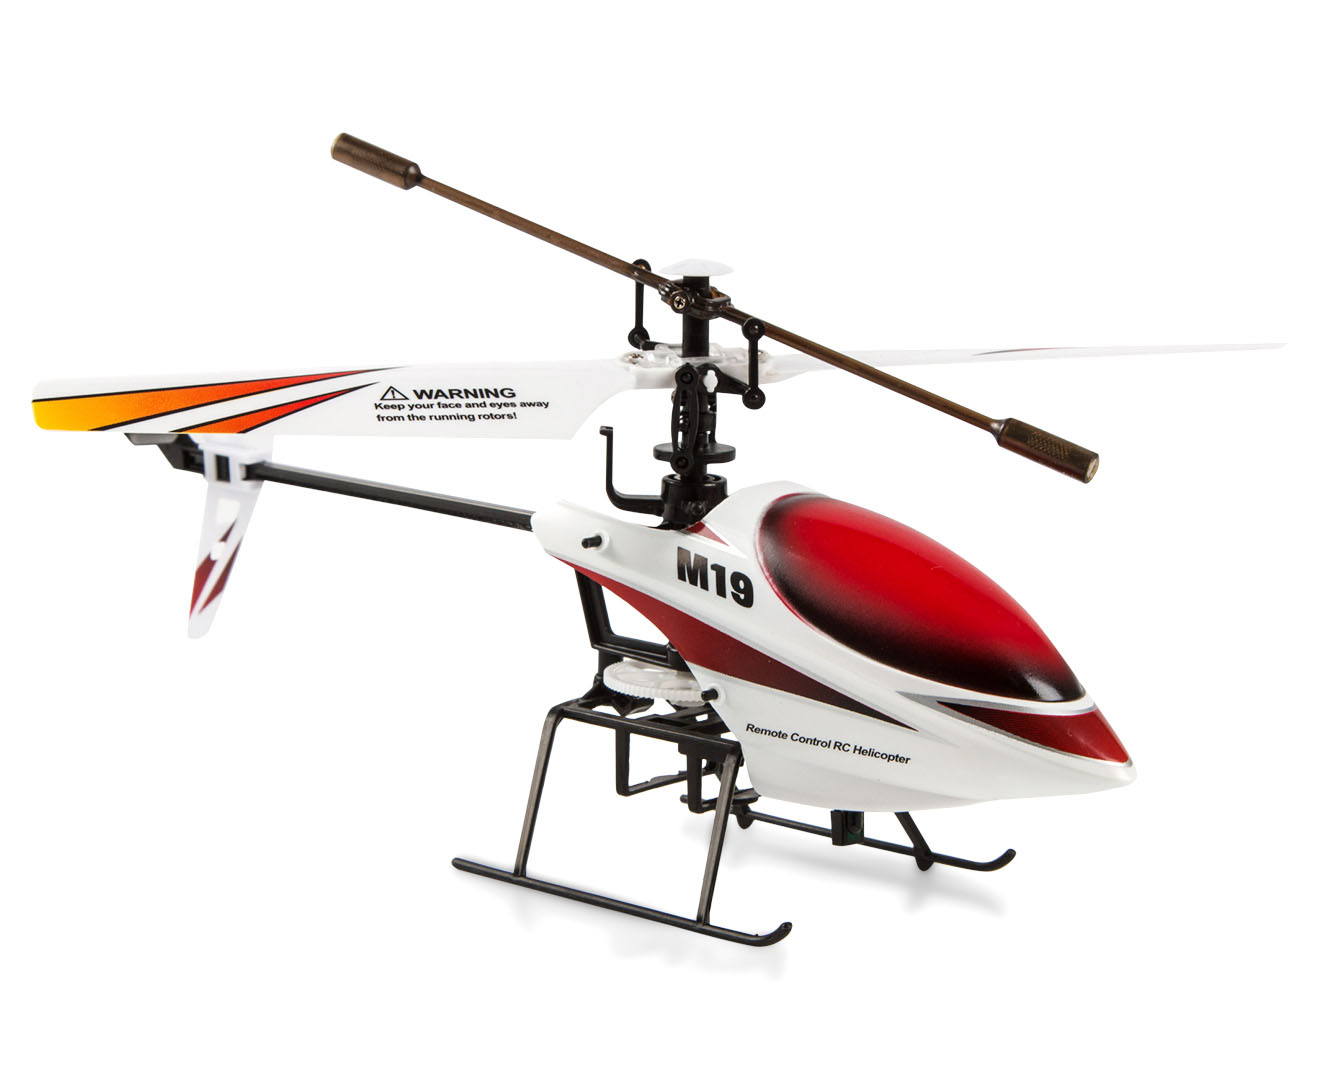 Skytech M19 Remote Control Helicopter - White/Red